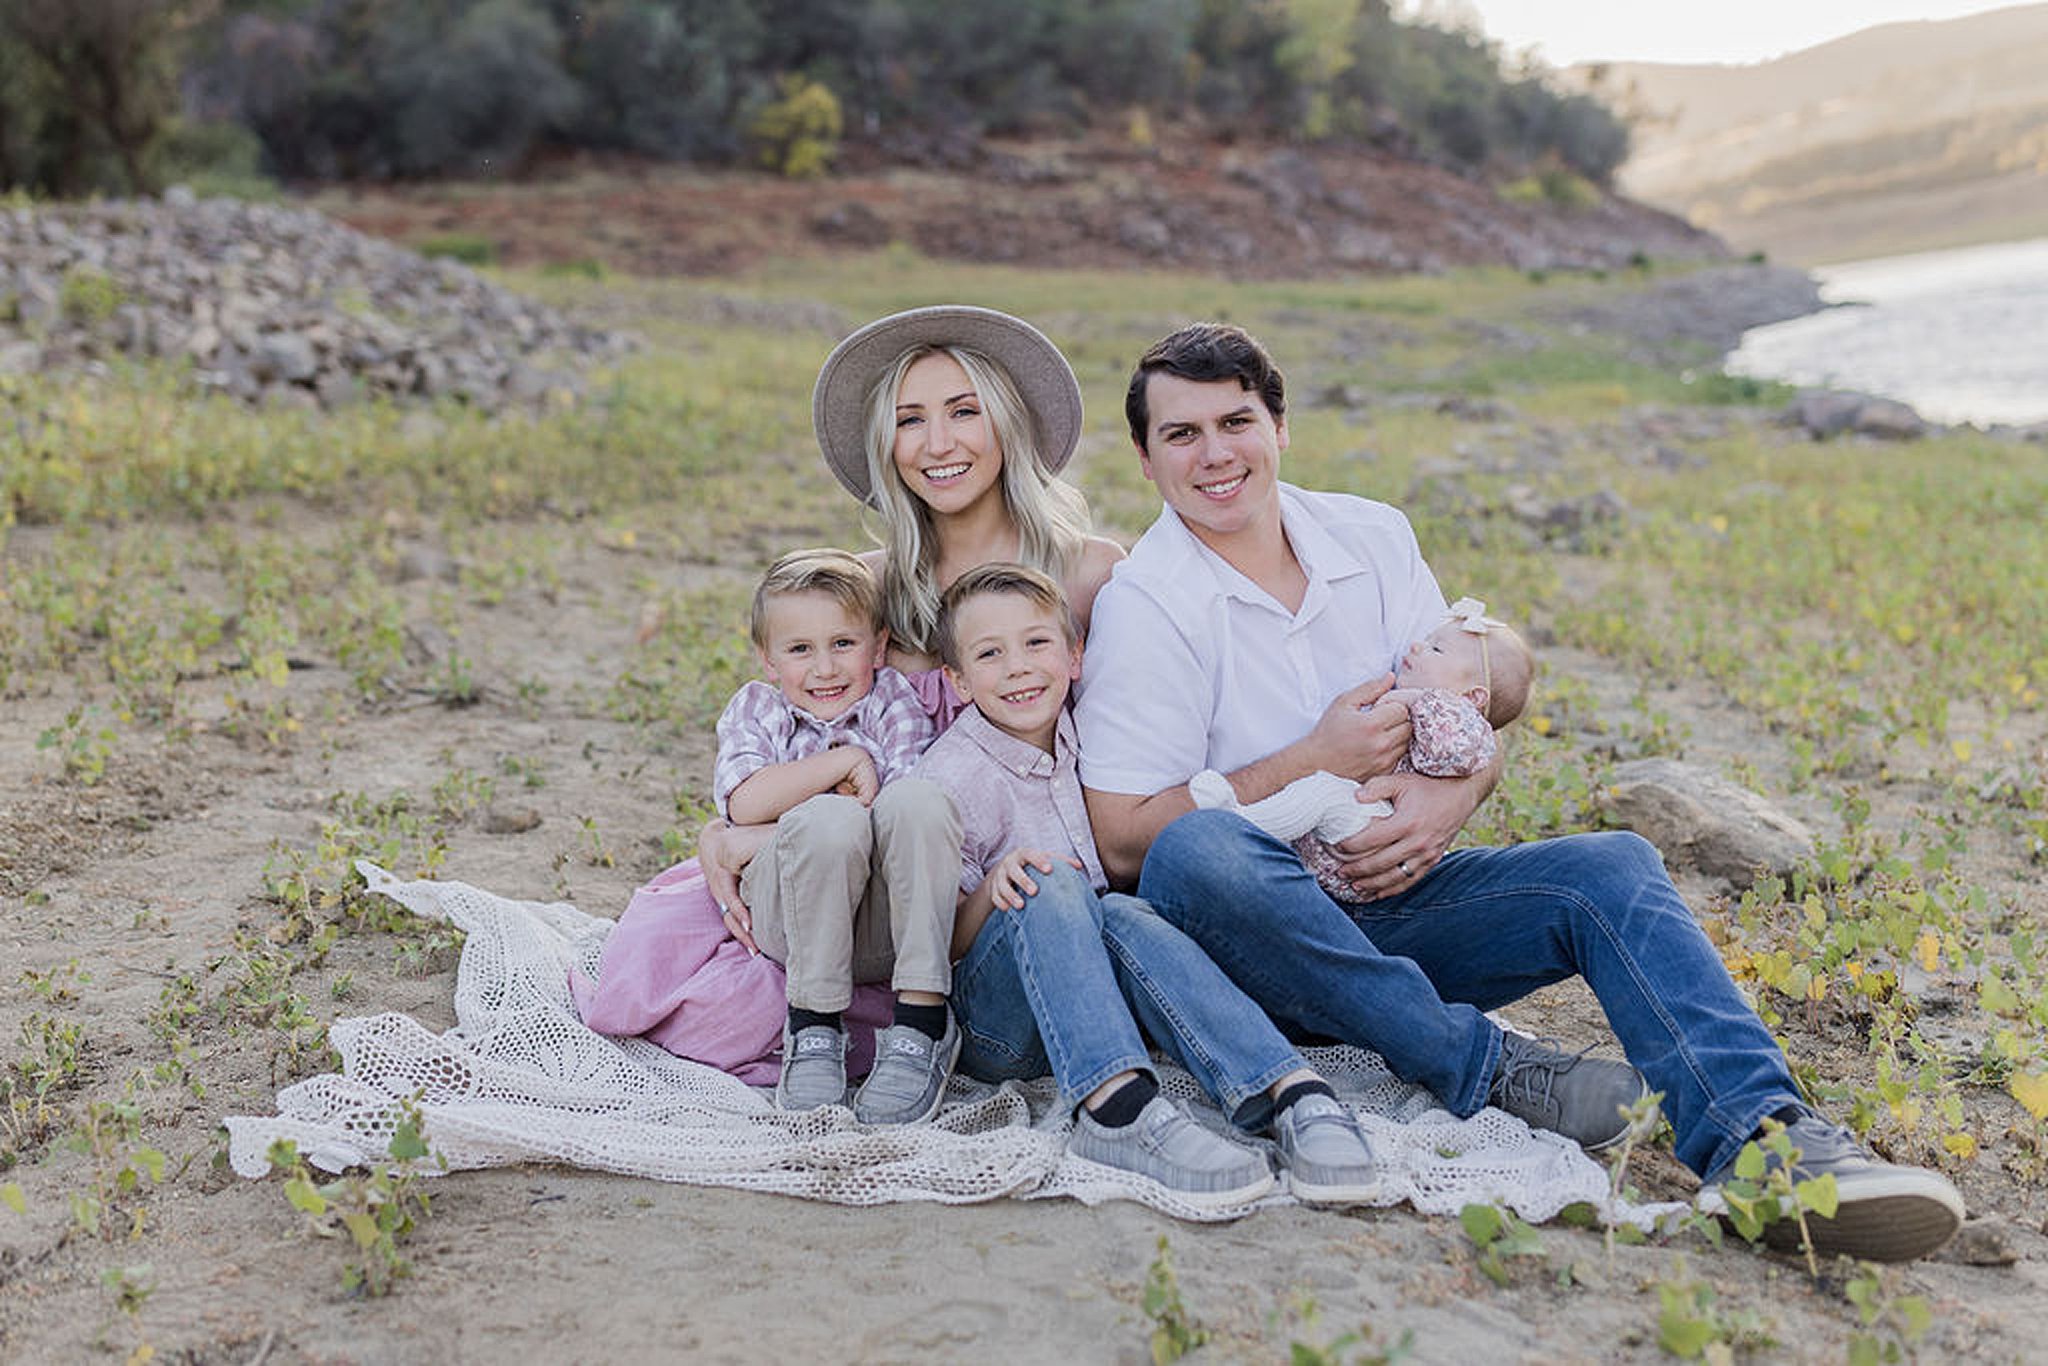 family of 5 sitting together on a blanket in a field Just Between Friends Folsom